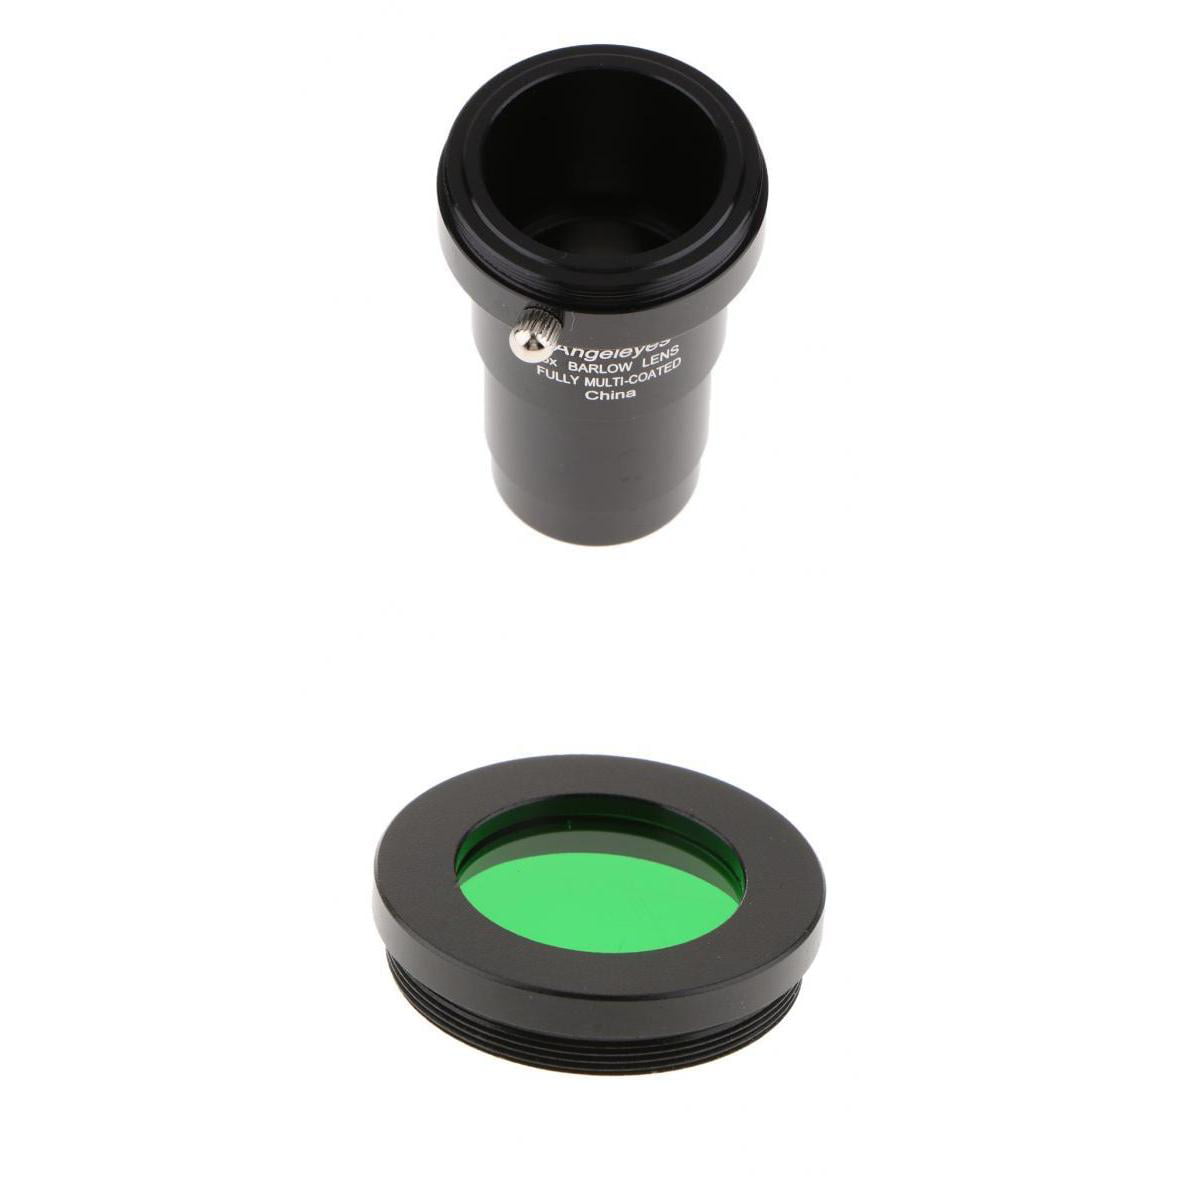 Filter and compact Barlow lens adapter for telescope eyepieces with 1.25" fit 